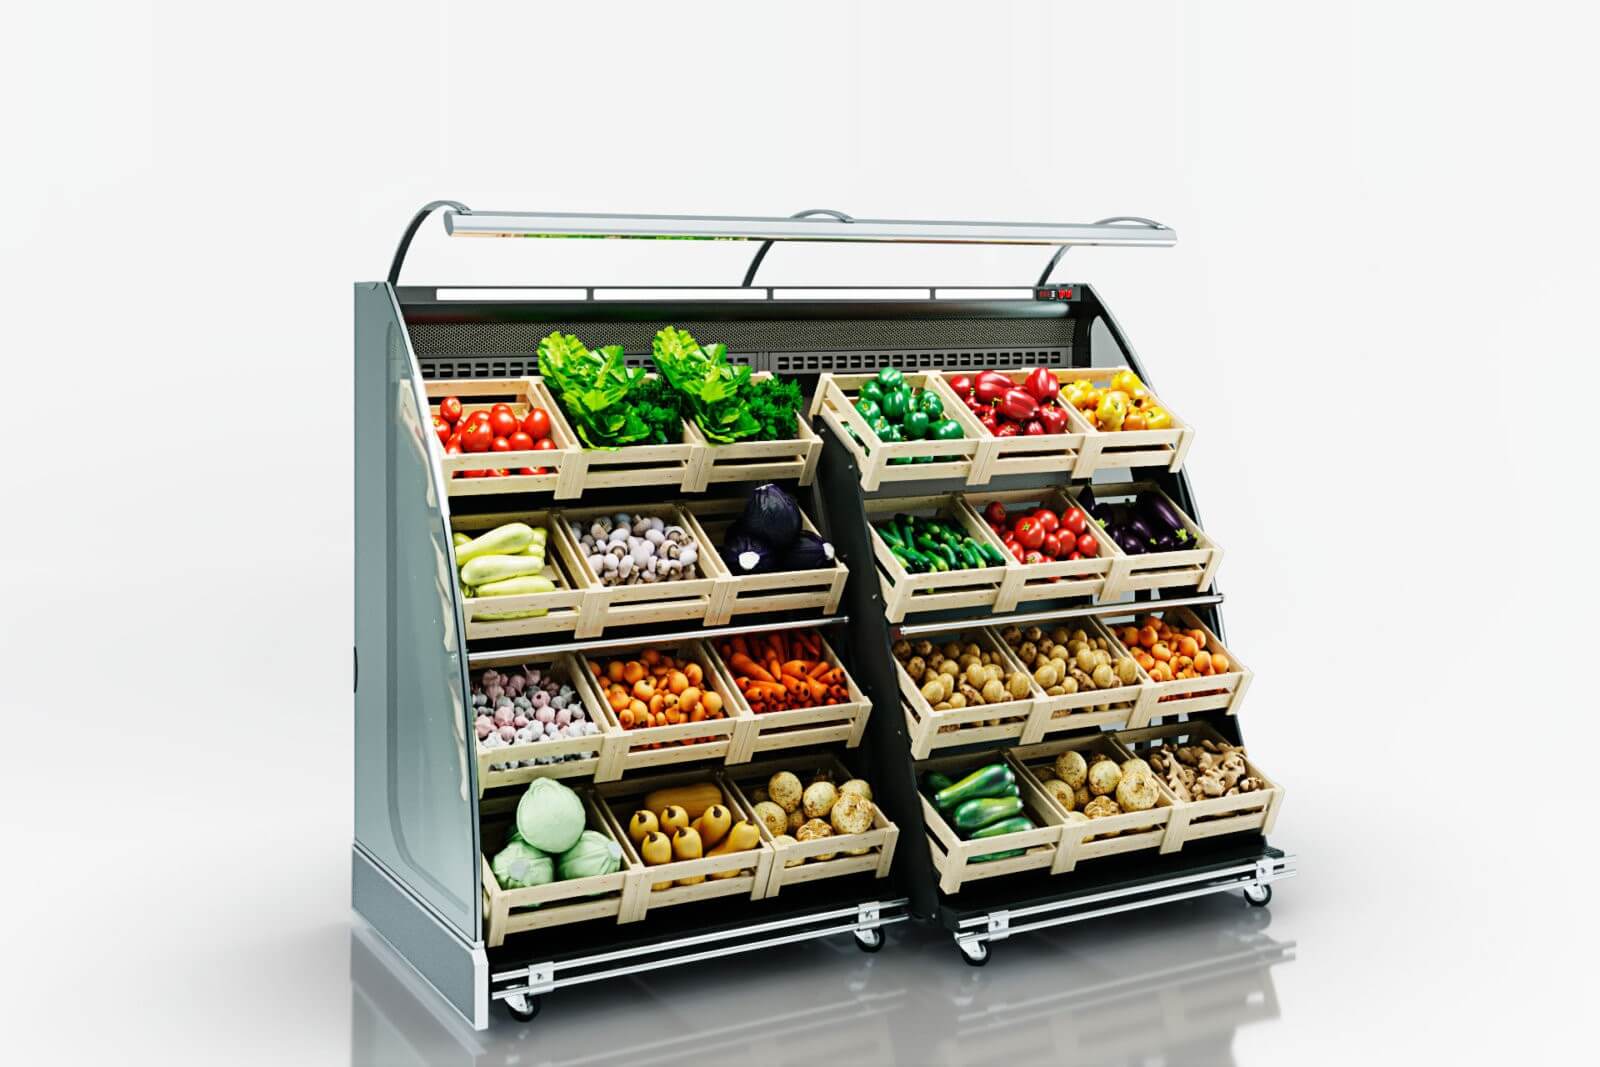 Buy refrigerating and freezing units for a farm produce store.